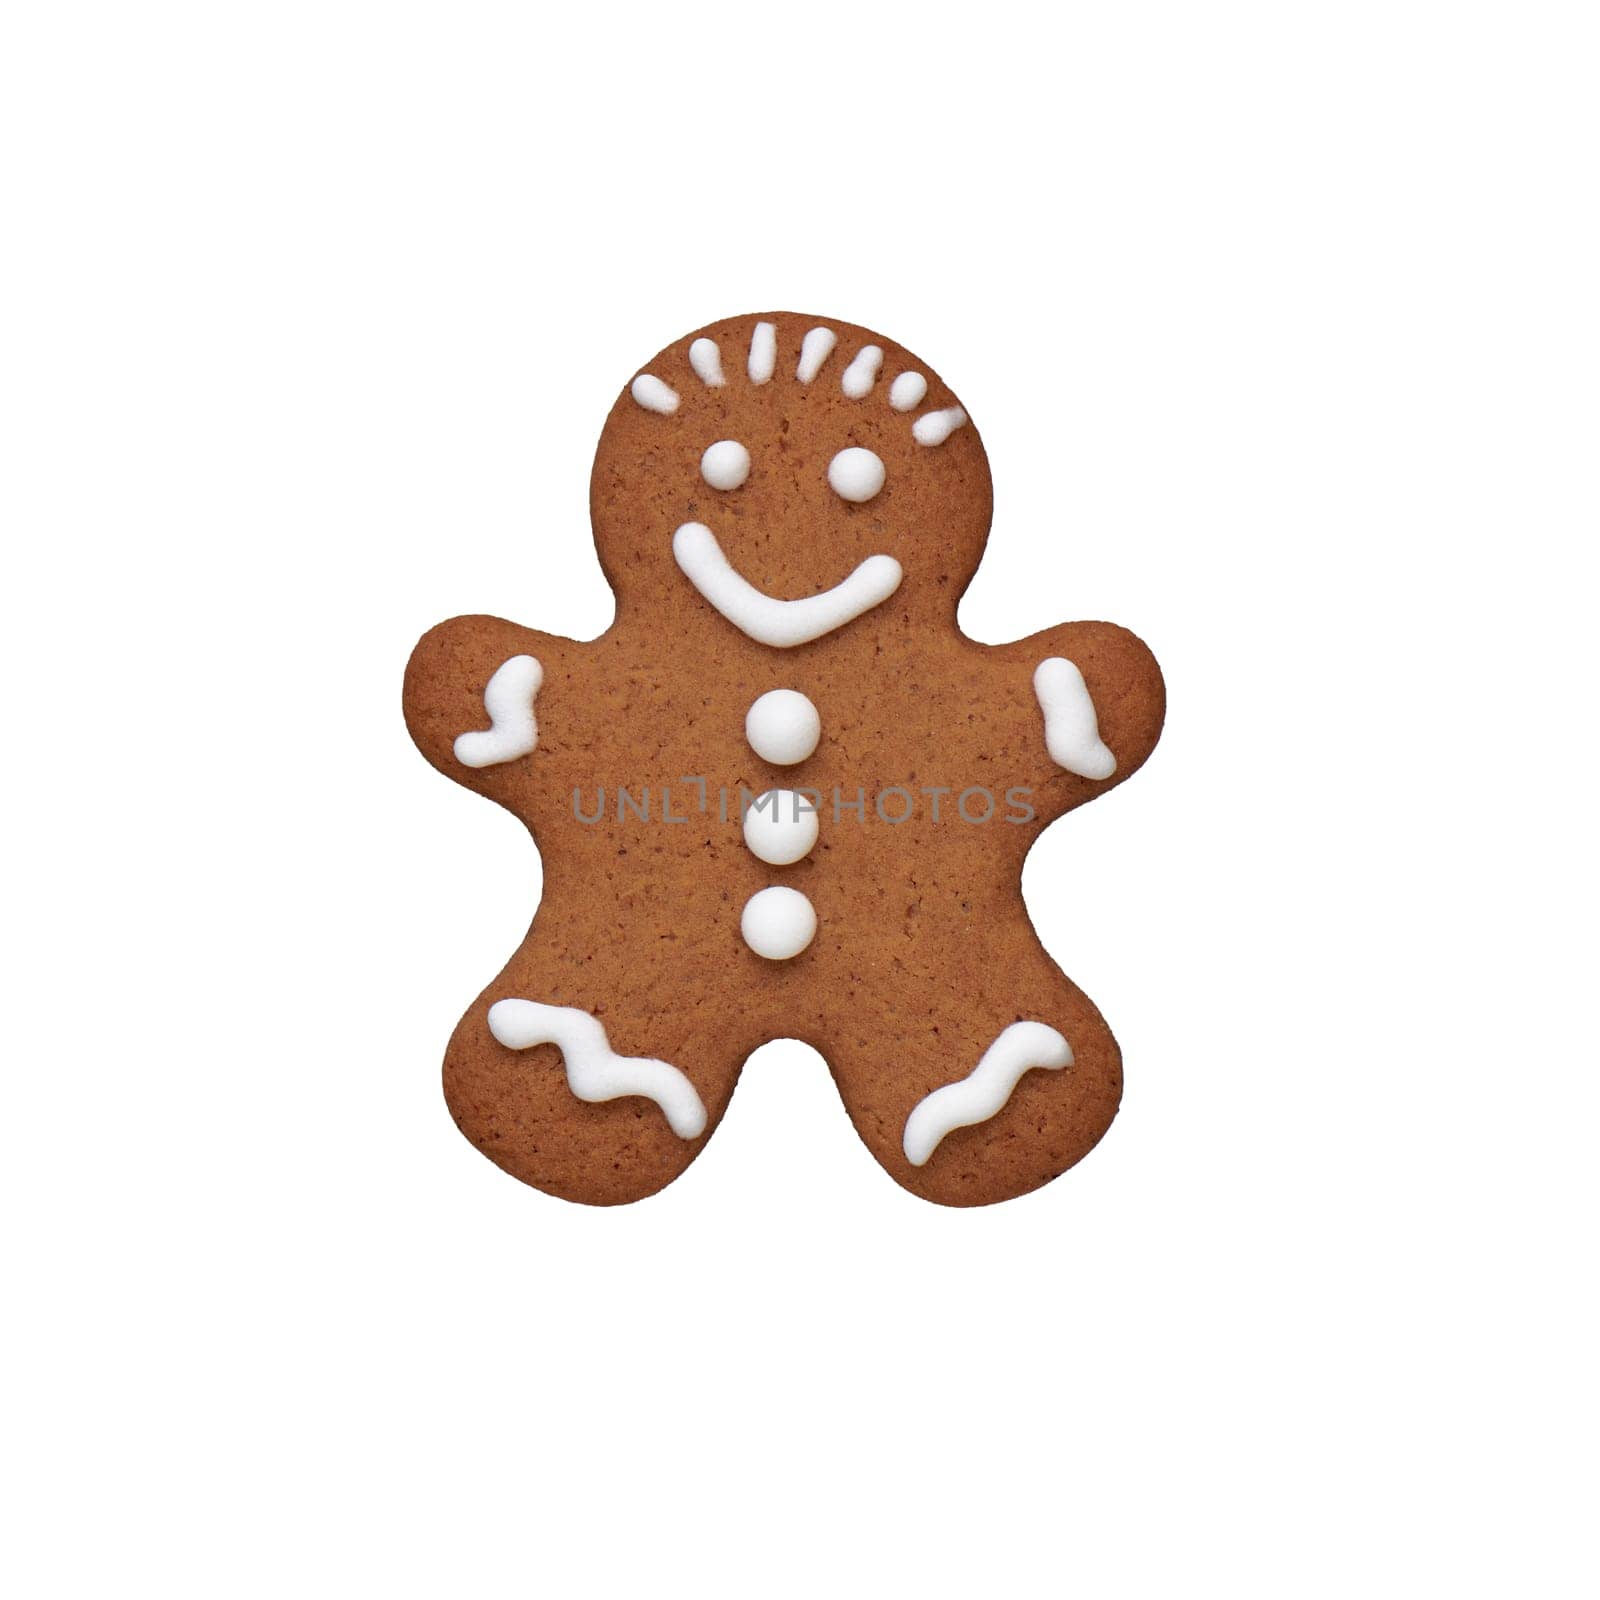 Hand painted gingerbread man cookie, cut out, isolated by maxcab